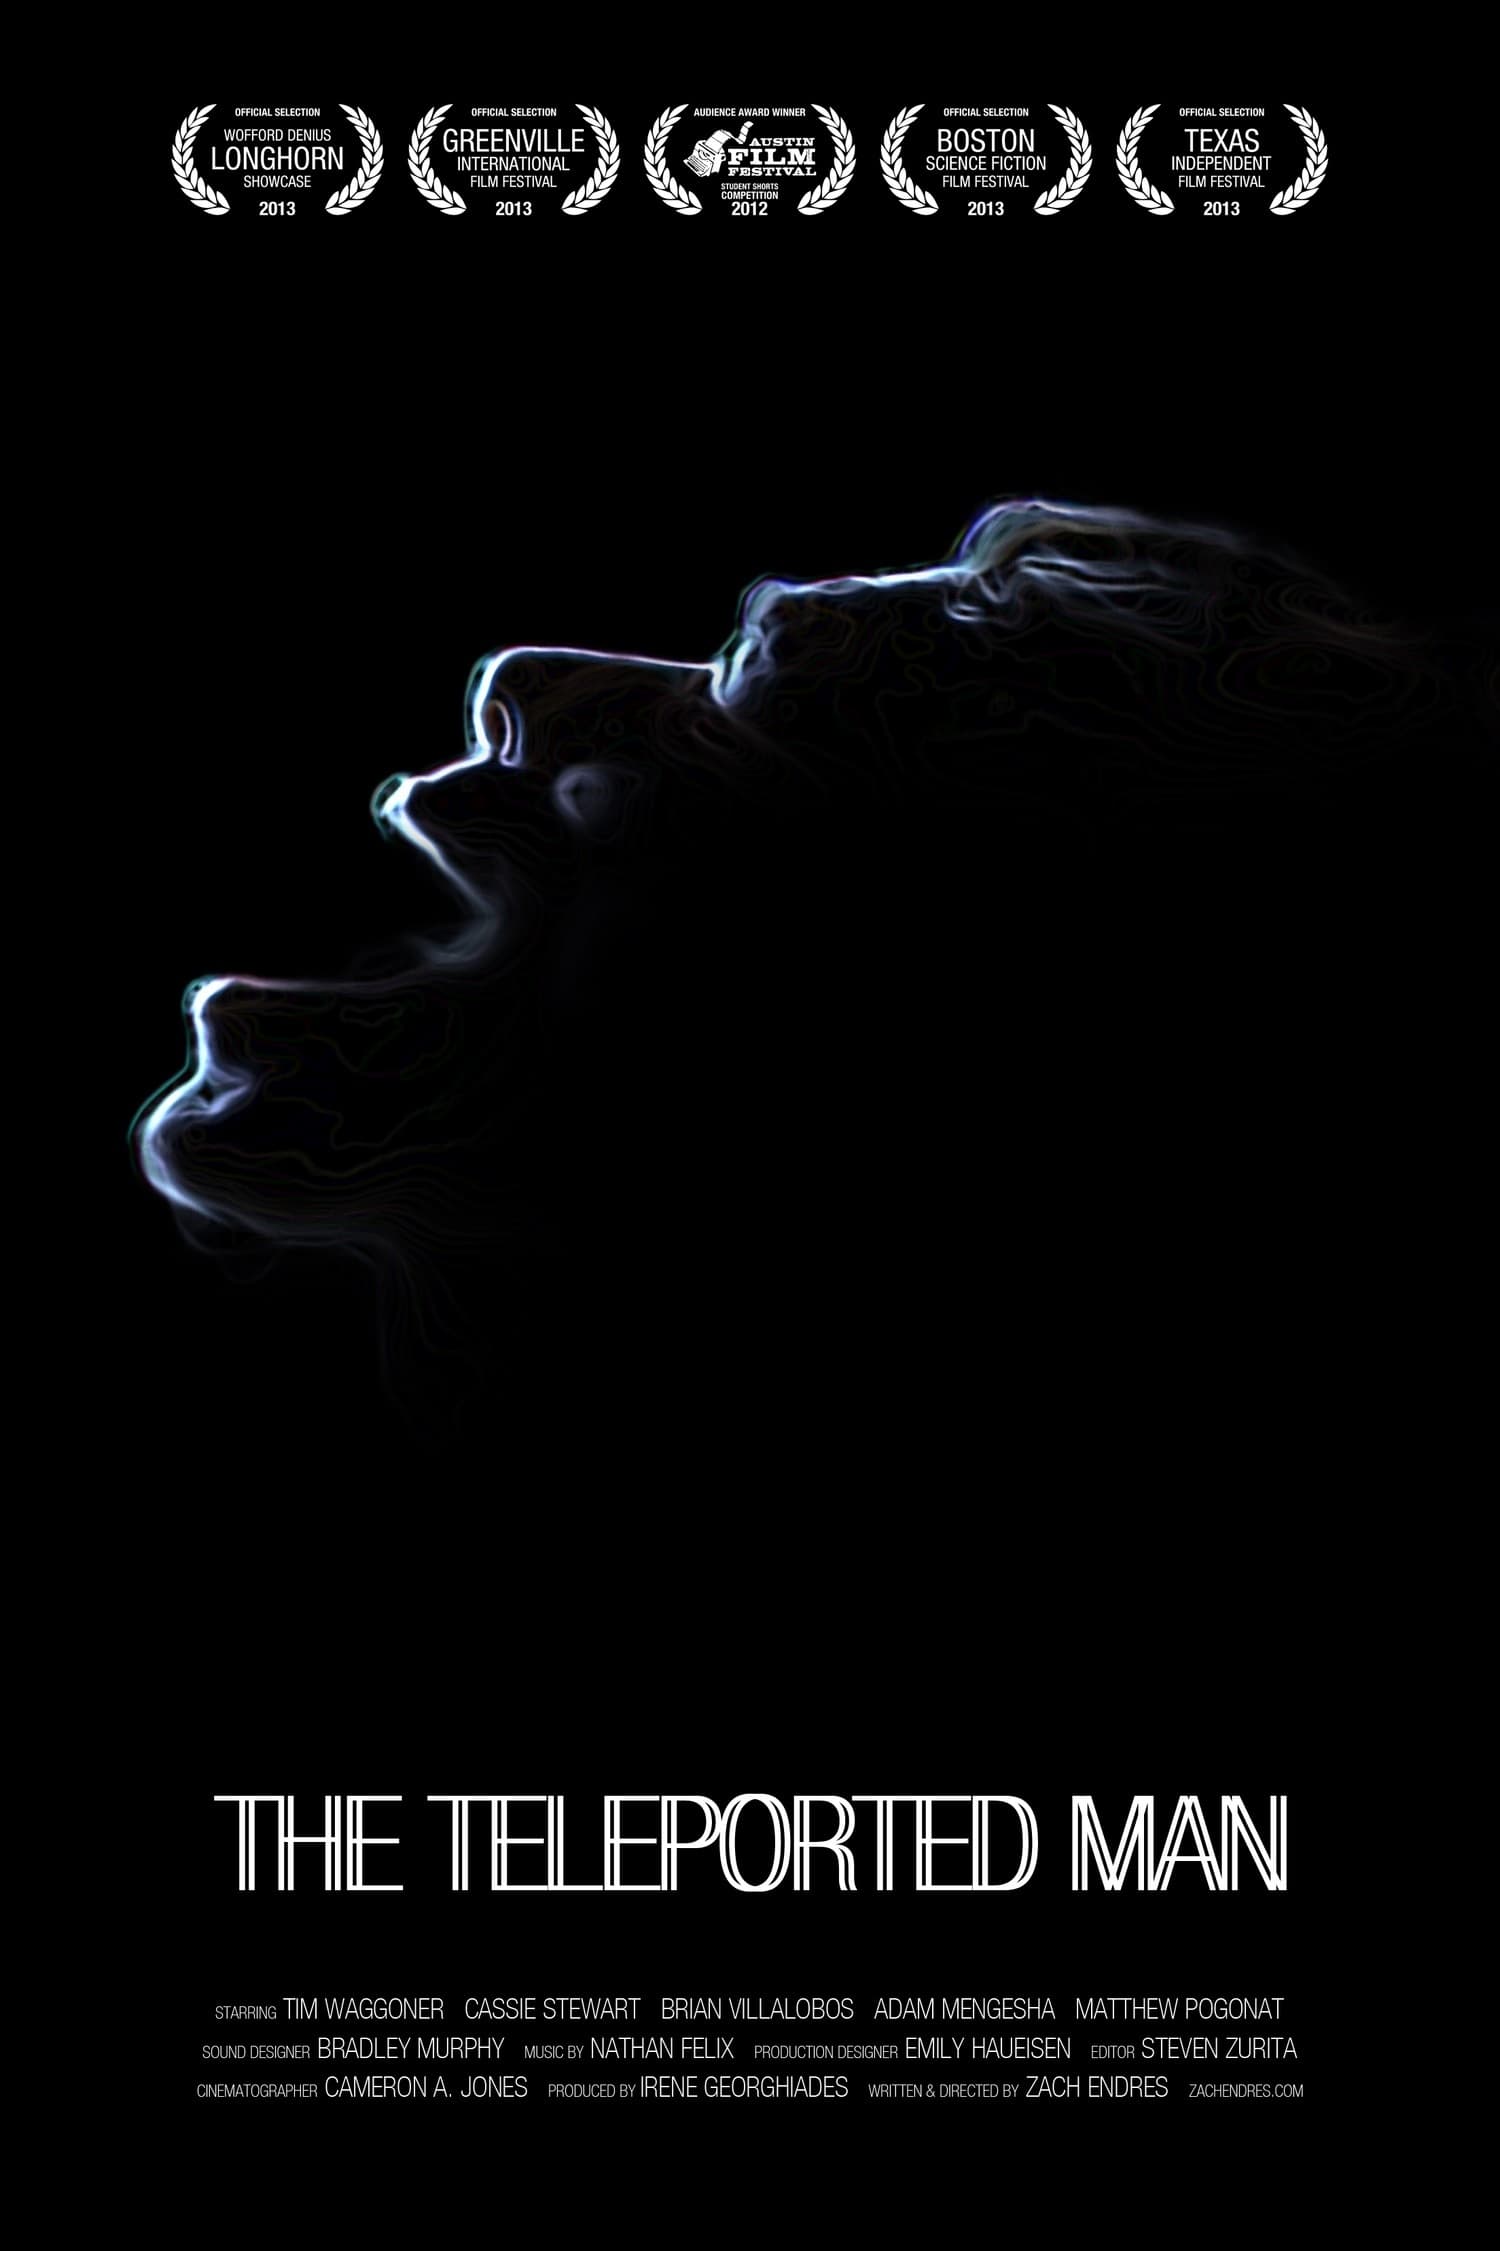 The Teleported Man